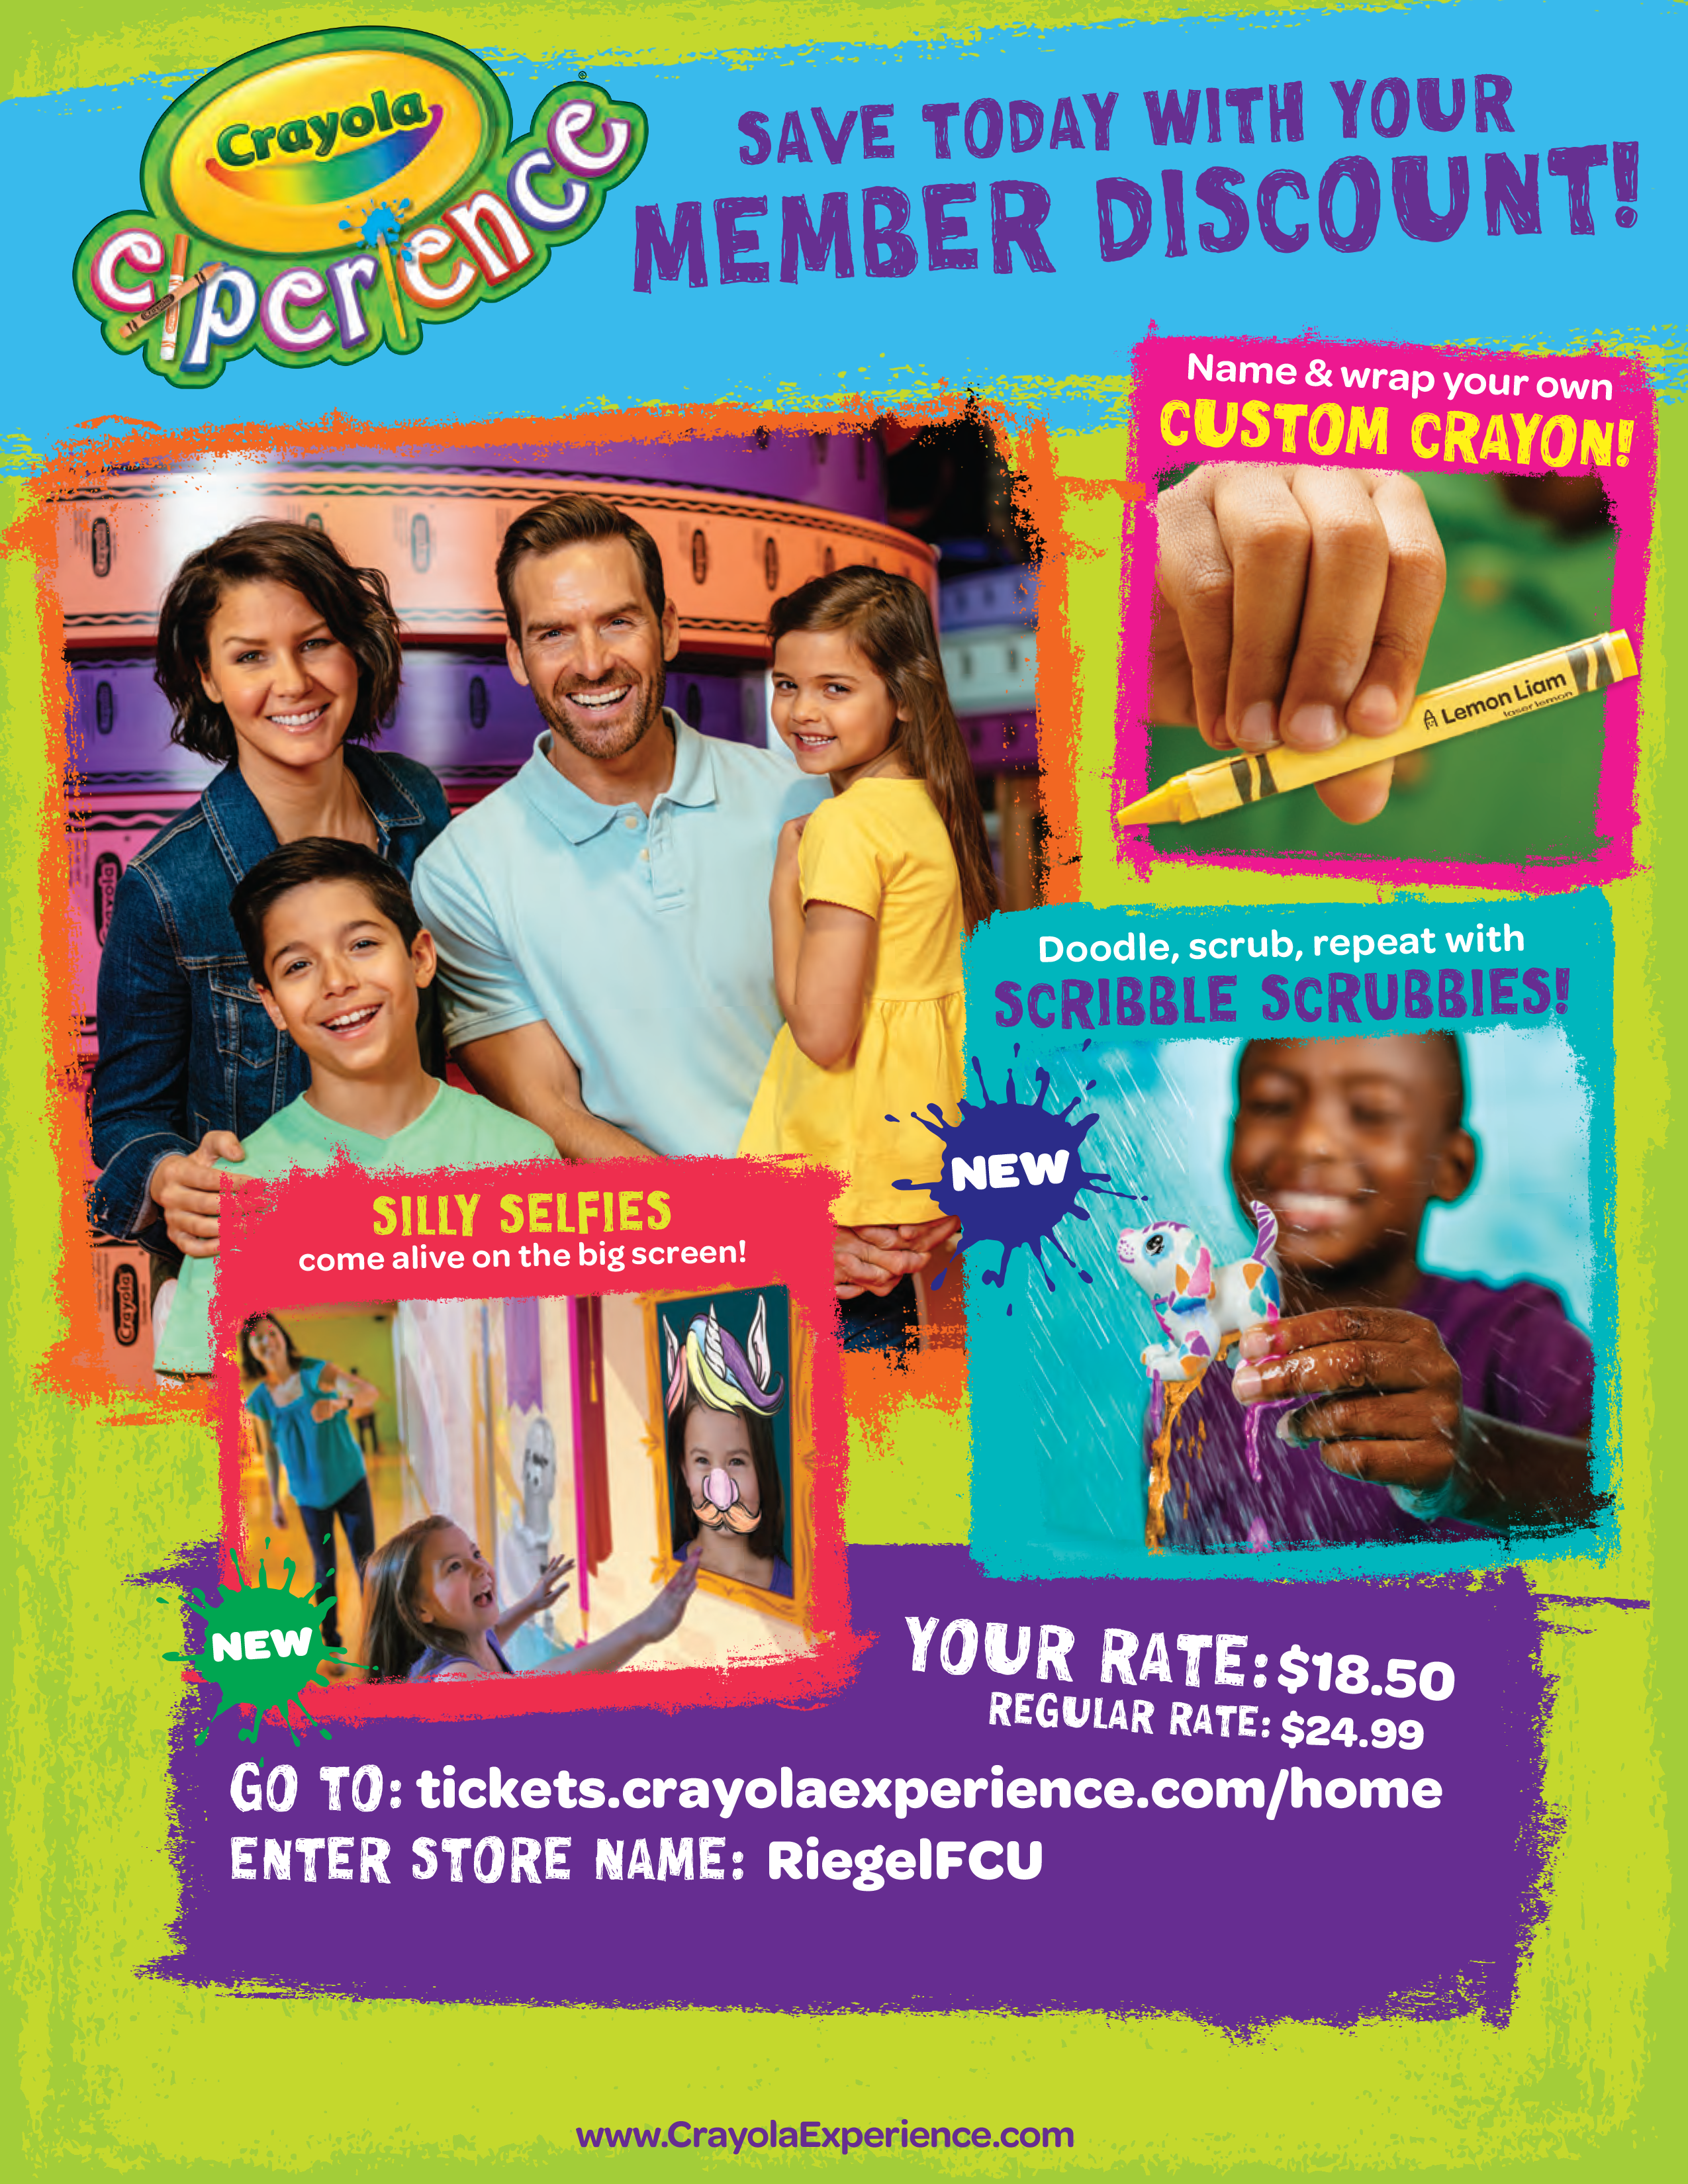 Save with a Riegel FCU member discount at the Crayola Experience!